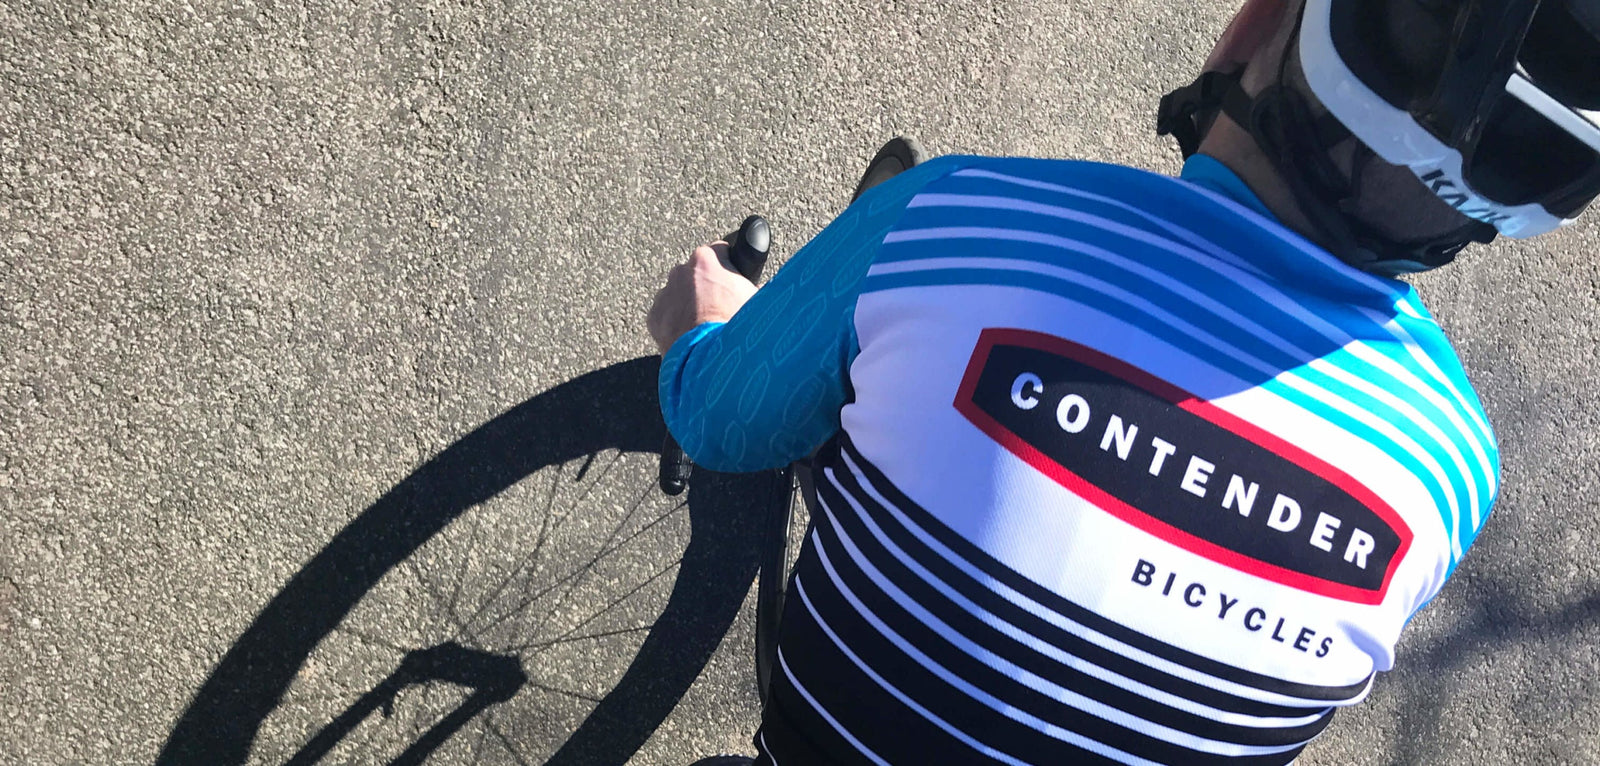 Hot off the Press: the 2018 Contender Club Kit